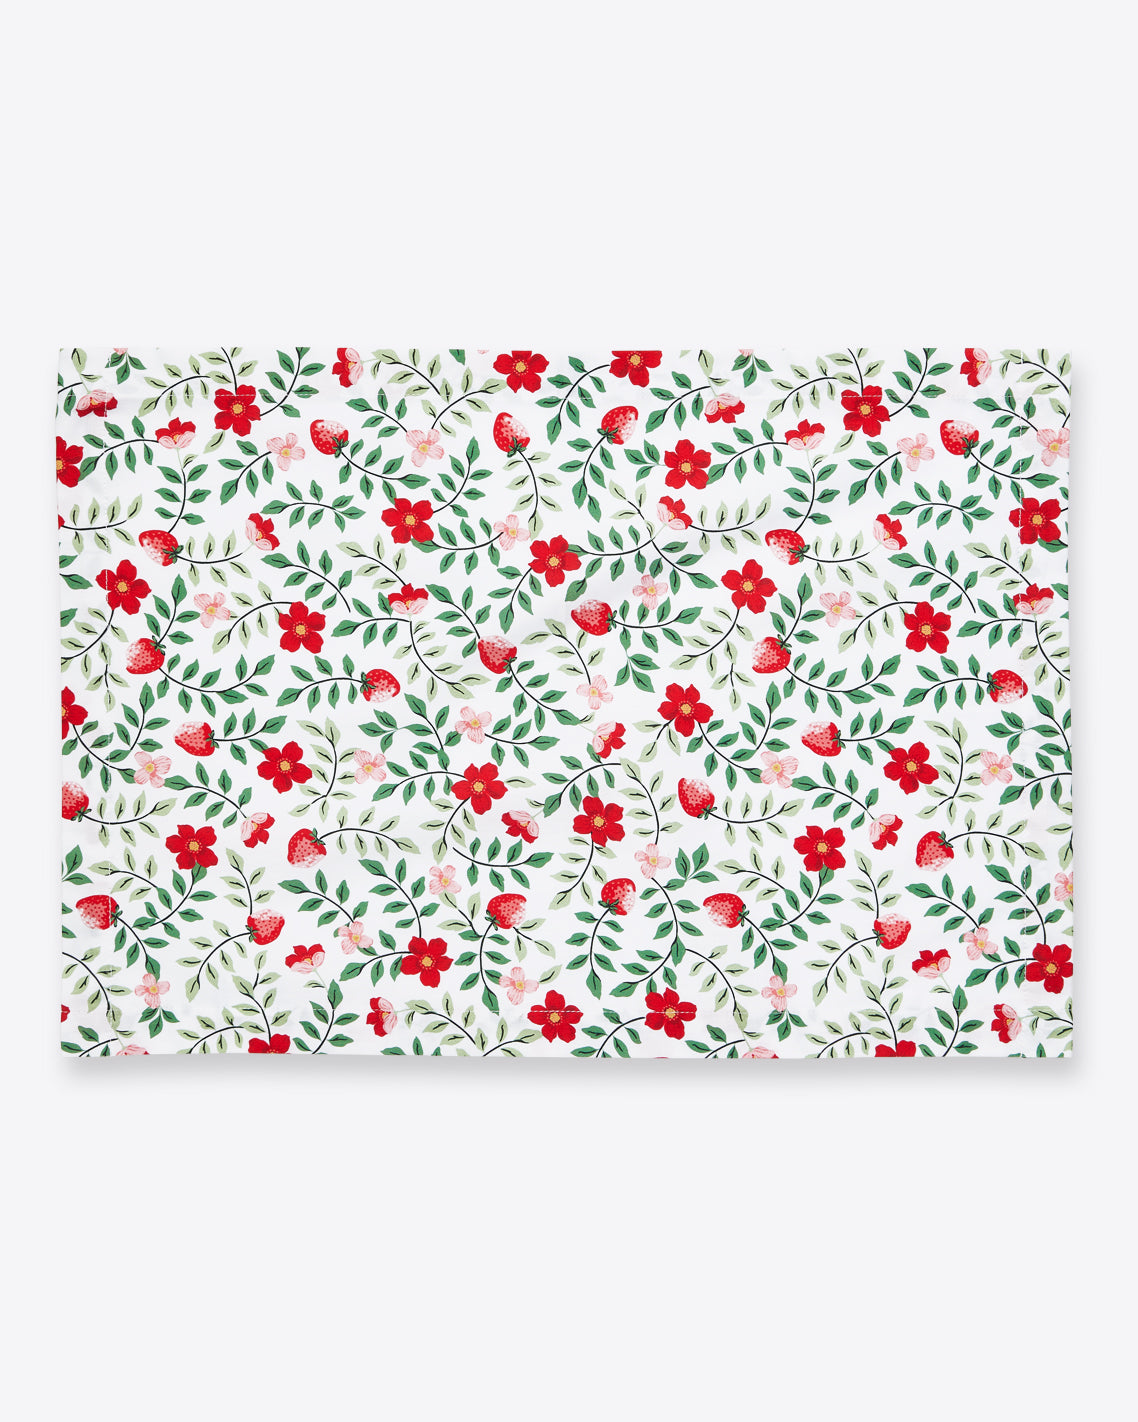 Placemats in Strawberry Field, set of 4